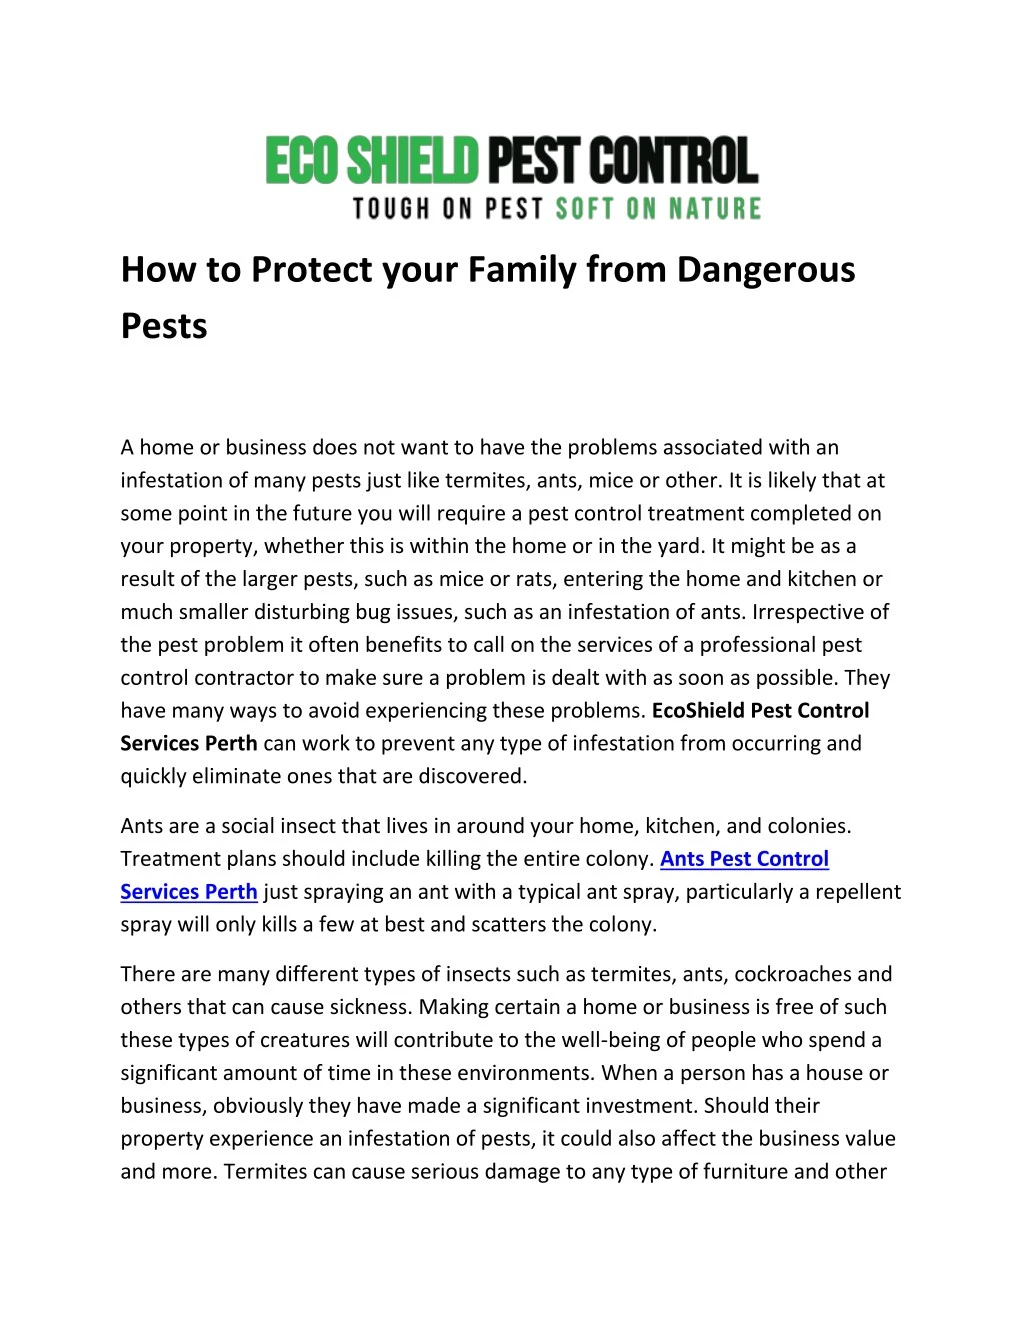 how to protect your family from dangerous pests